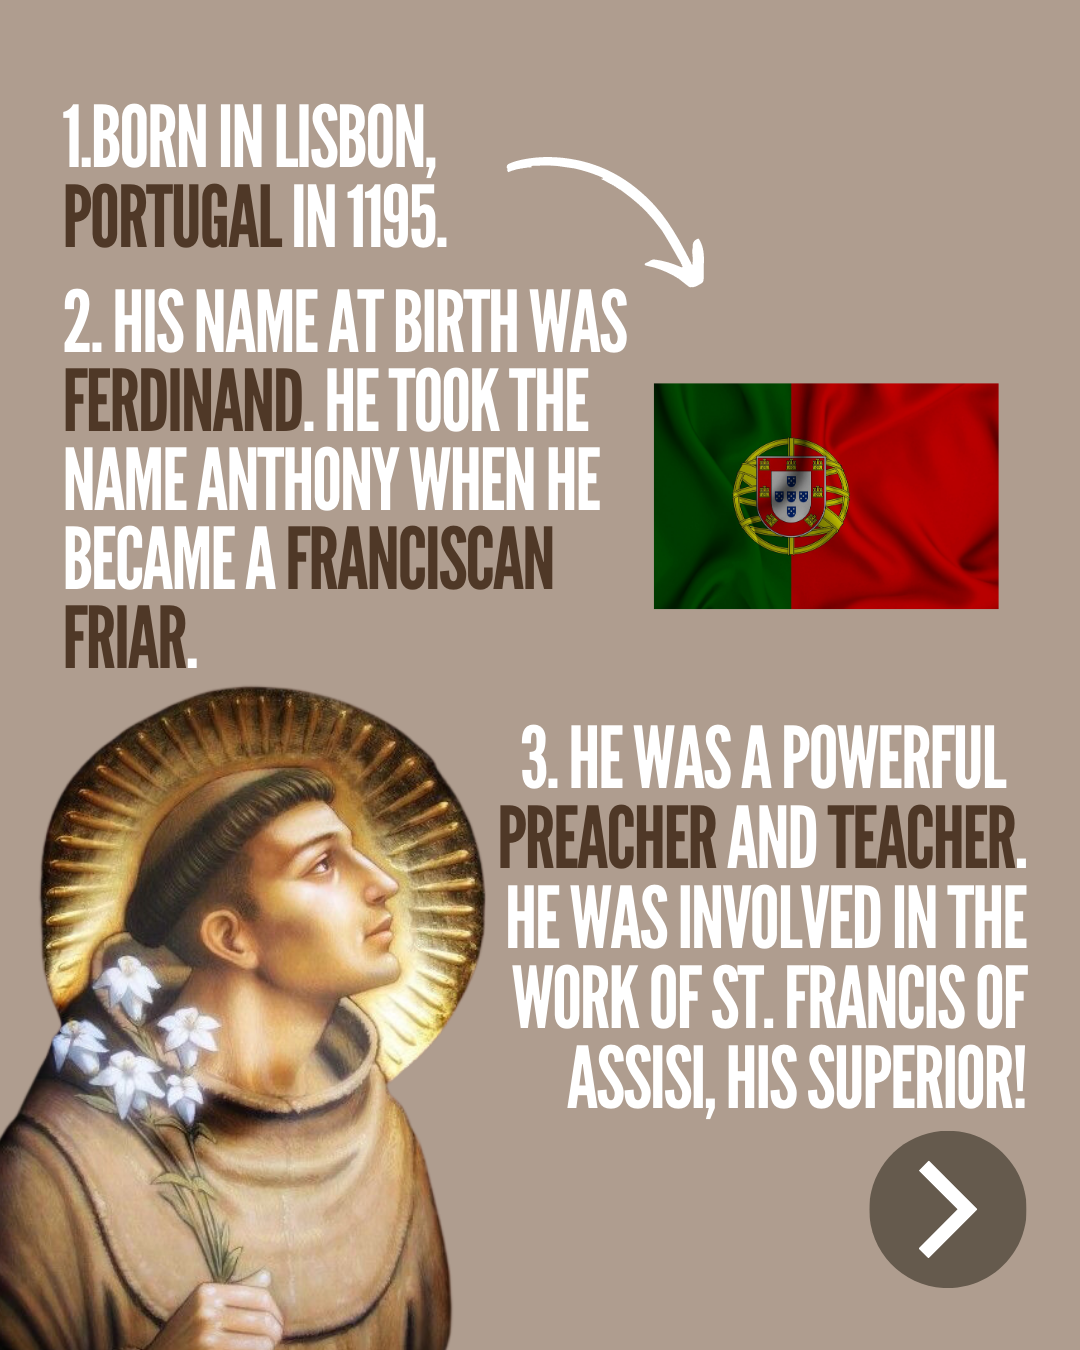 What is Saint Anthony Known for